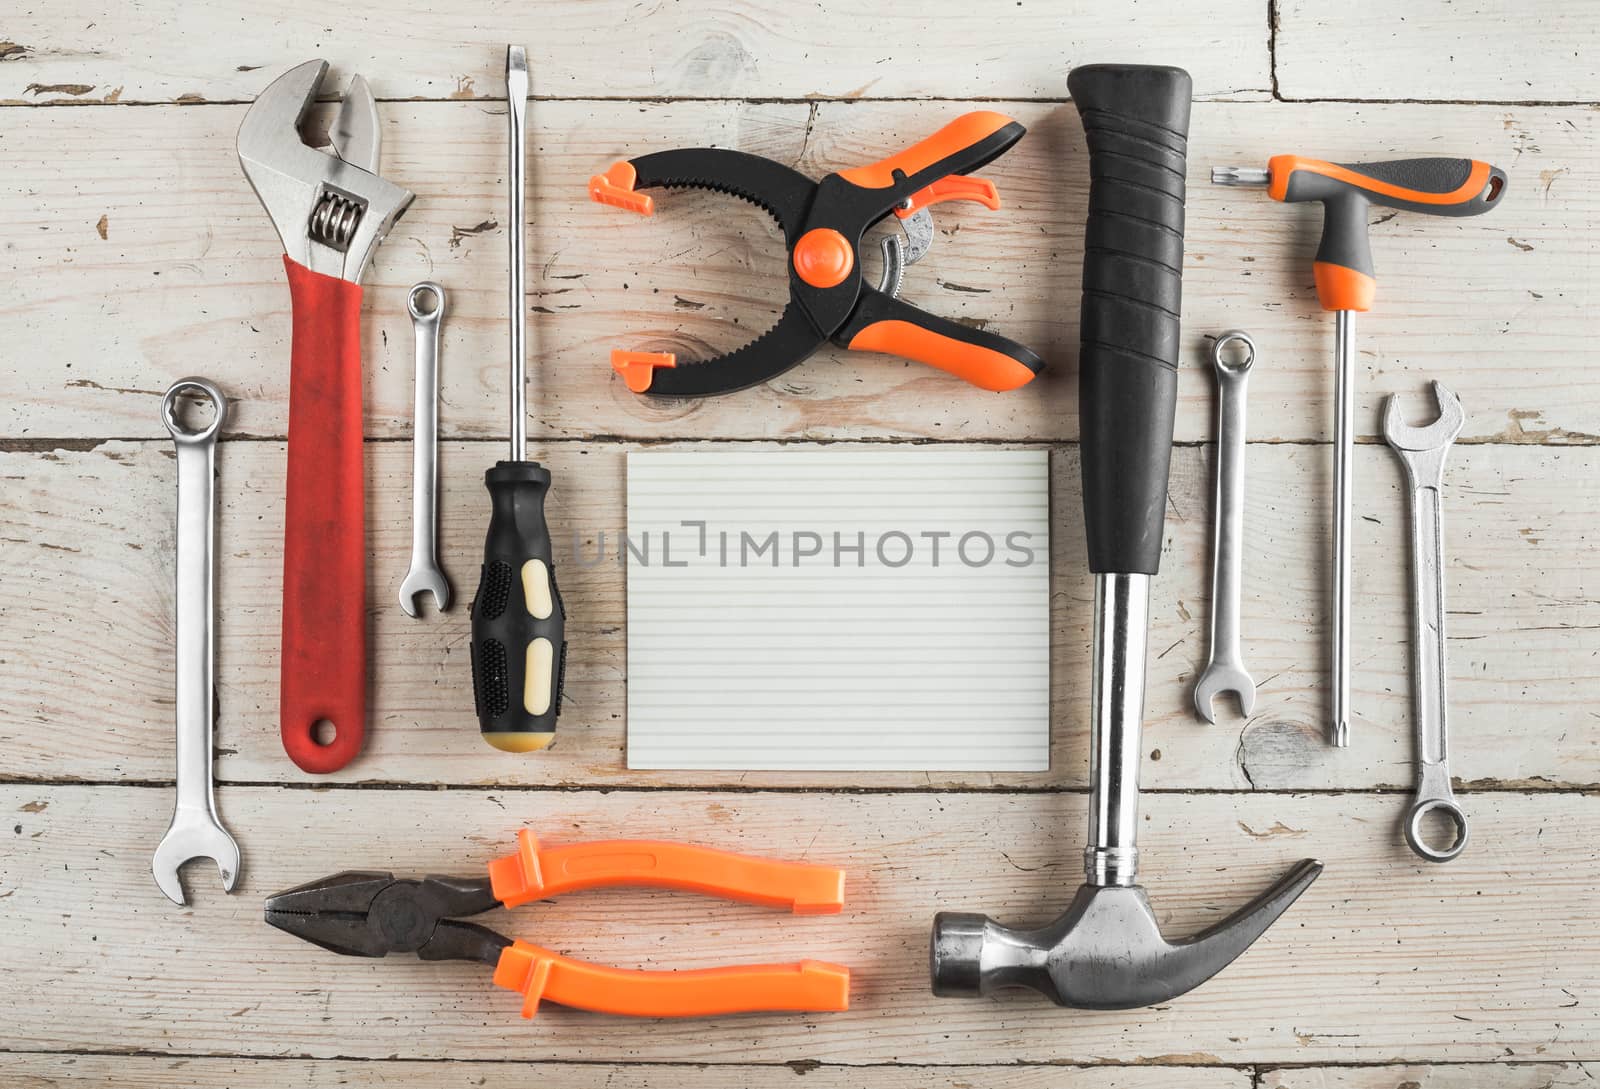 Greeting Card to Happy Father's Day, Happy Birthday Dad, concept, set of different tools: a hammer, wrench, screwdriver, various spanners, clamp on a wooden background